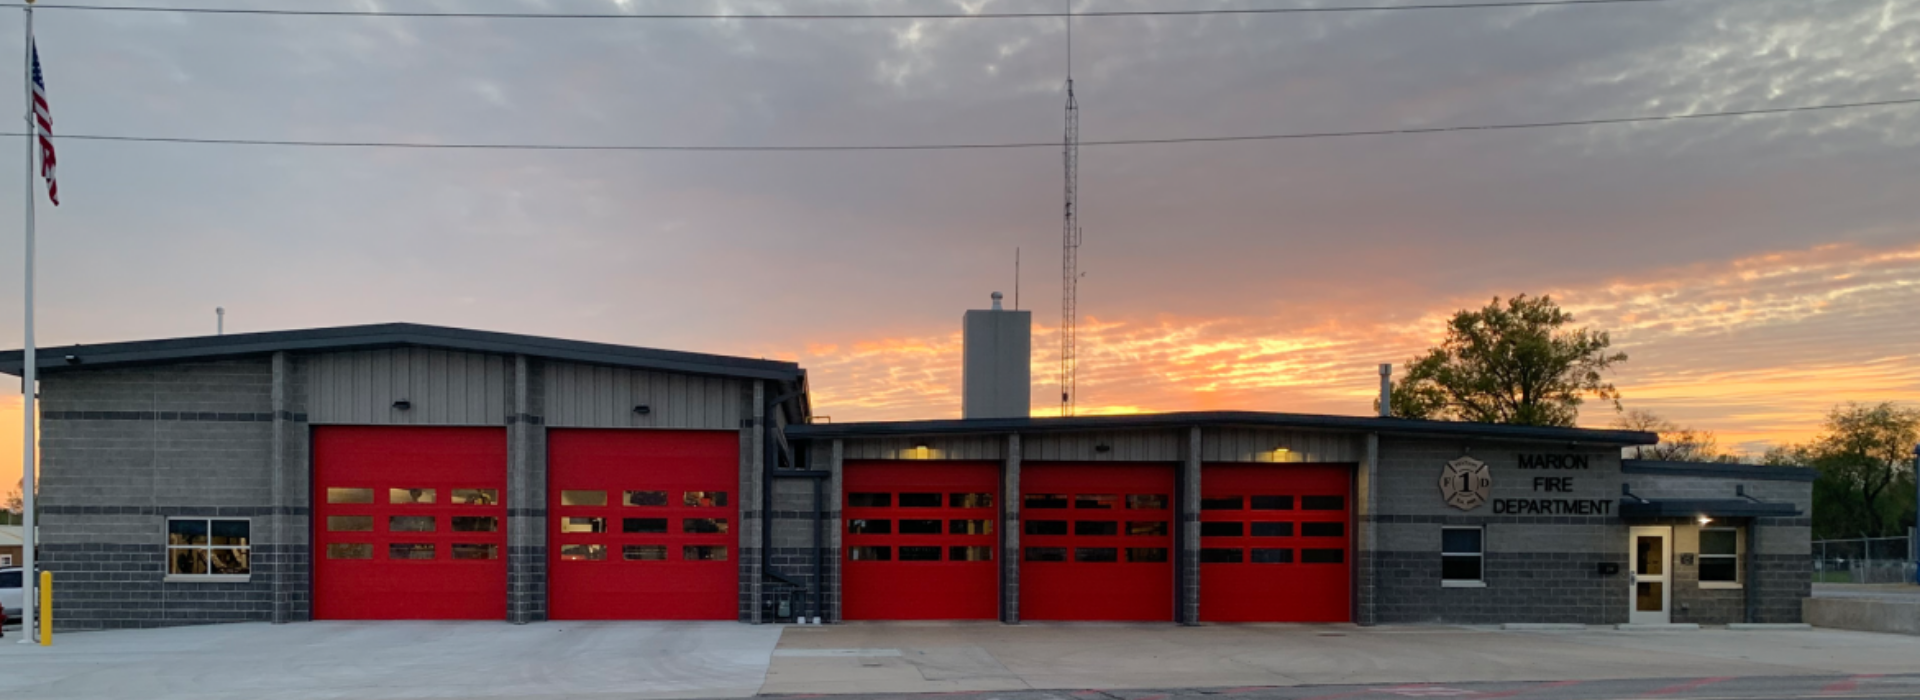 maron fire department with the sun setting in the background